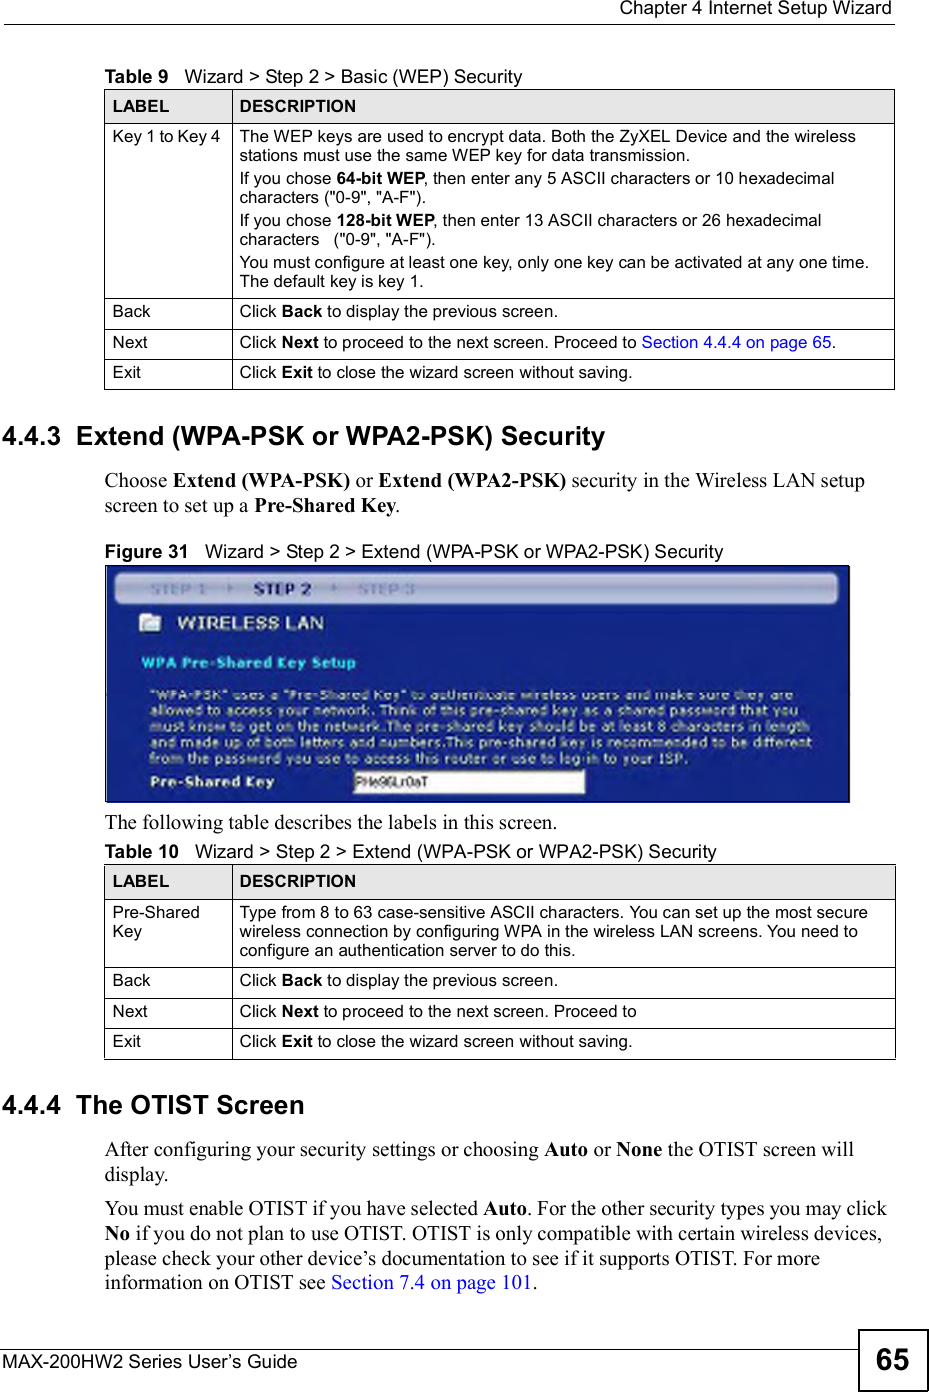  Chapter 4Internet Setup WizardMAX-200HW2 Series User s Guide 654.4.3  Extend (WPA-PSK or WPA2-PSK) SecurityChoose Extend (WPA-PSK) or Extend (WPA2-PSK) security in the Wireless LAN setup screen to set up a Pre-Shared Key.Figure 31   Wizard &gt; Step 2 &gt; Extend (WPA-PSK or WPA2-PSK) SecurityThe following table describes the labels in this screen. 4.4.4  The OTIST ScreenAfter configuring your security settings or choosing Auto or None the OTIST screen will display.You mustenable OTIST if you have selected Auto. For the other security types you may click No if you do not plan to use OTIST. OTIST is only compatible with certain wireless devices, please check your other device!s documentation to see if it supports OTIST. For more information on OTIST see Section 7.4 on page 101.Key 1 to Key 4  The WEP keys are used to encrypt data. Both the ZyXEL Device and the wireless stations must use the same WEP key for data transmission.If you chose 64-bit WEP, then enter any 5 ASCII characters or 10 hexadecimal characters (&quot;0-9&quot;, &quot;A-F&quot;).If you chose 128-bit WEP, then enter 13 ASCII characters or 26 hexadecimal characters   (&quot;0-9&quot;, &quot;A-F&quot;). You must configure at least one key, only one key can be activated at any one time. The default key is key 1.Back Click Back to display the previous screen.Next Click Next to proceed to the next screen. Proceed to Section 4.4.4 on page 65.Exit Click Exit to close the wizard screen without saving.Table 9   Wizard &gt; Step 2 &gt; Basic (WEP) SecurityLABEL DESCRIPTIONTable 10   Wizard &gt; Step 2 &gt; Extend (WPA-PSK or WPA2-PSK) SecurityLABEL DESCRIPTIONPre-Shared KeyType from 8 to 63 case-sensitive ASCII characters. You can set up the most secure wireless connection by configuring WPA in the wireless LAN screens. You need to configure an authentication server to do this.Back Click Back to display the previous screen.Next Click Next to proceed to the next screen. Proceed toExit Click Exit to close the wizard screen without saving.